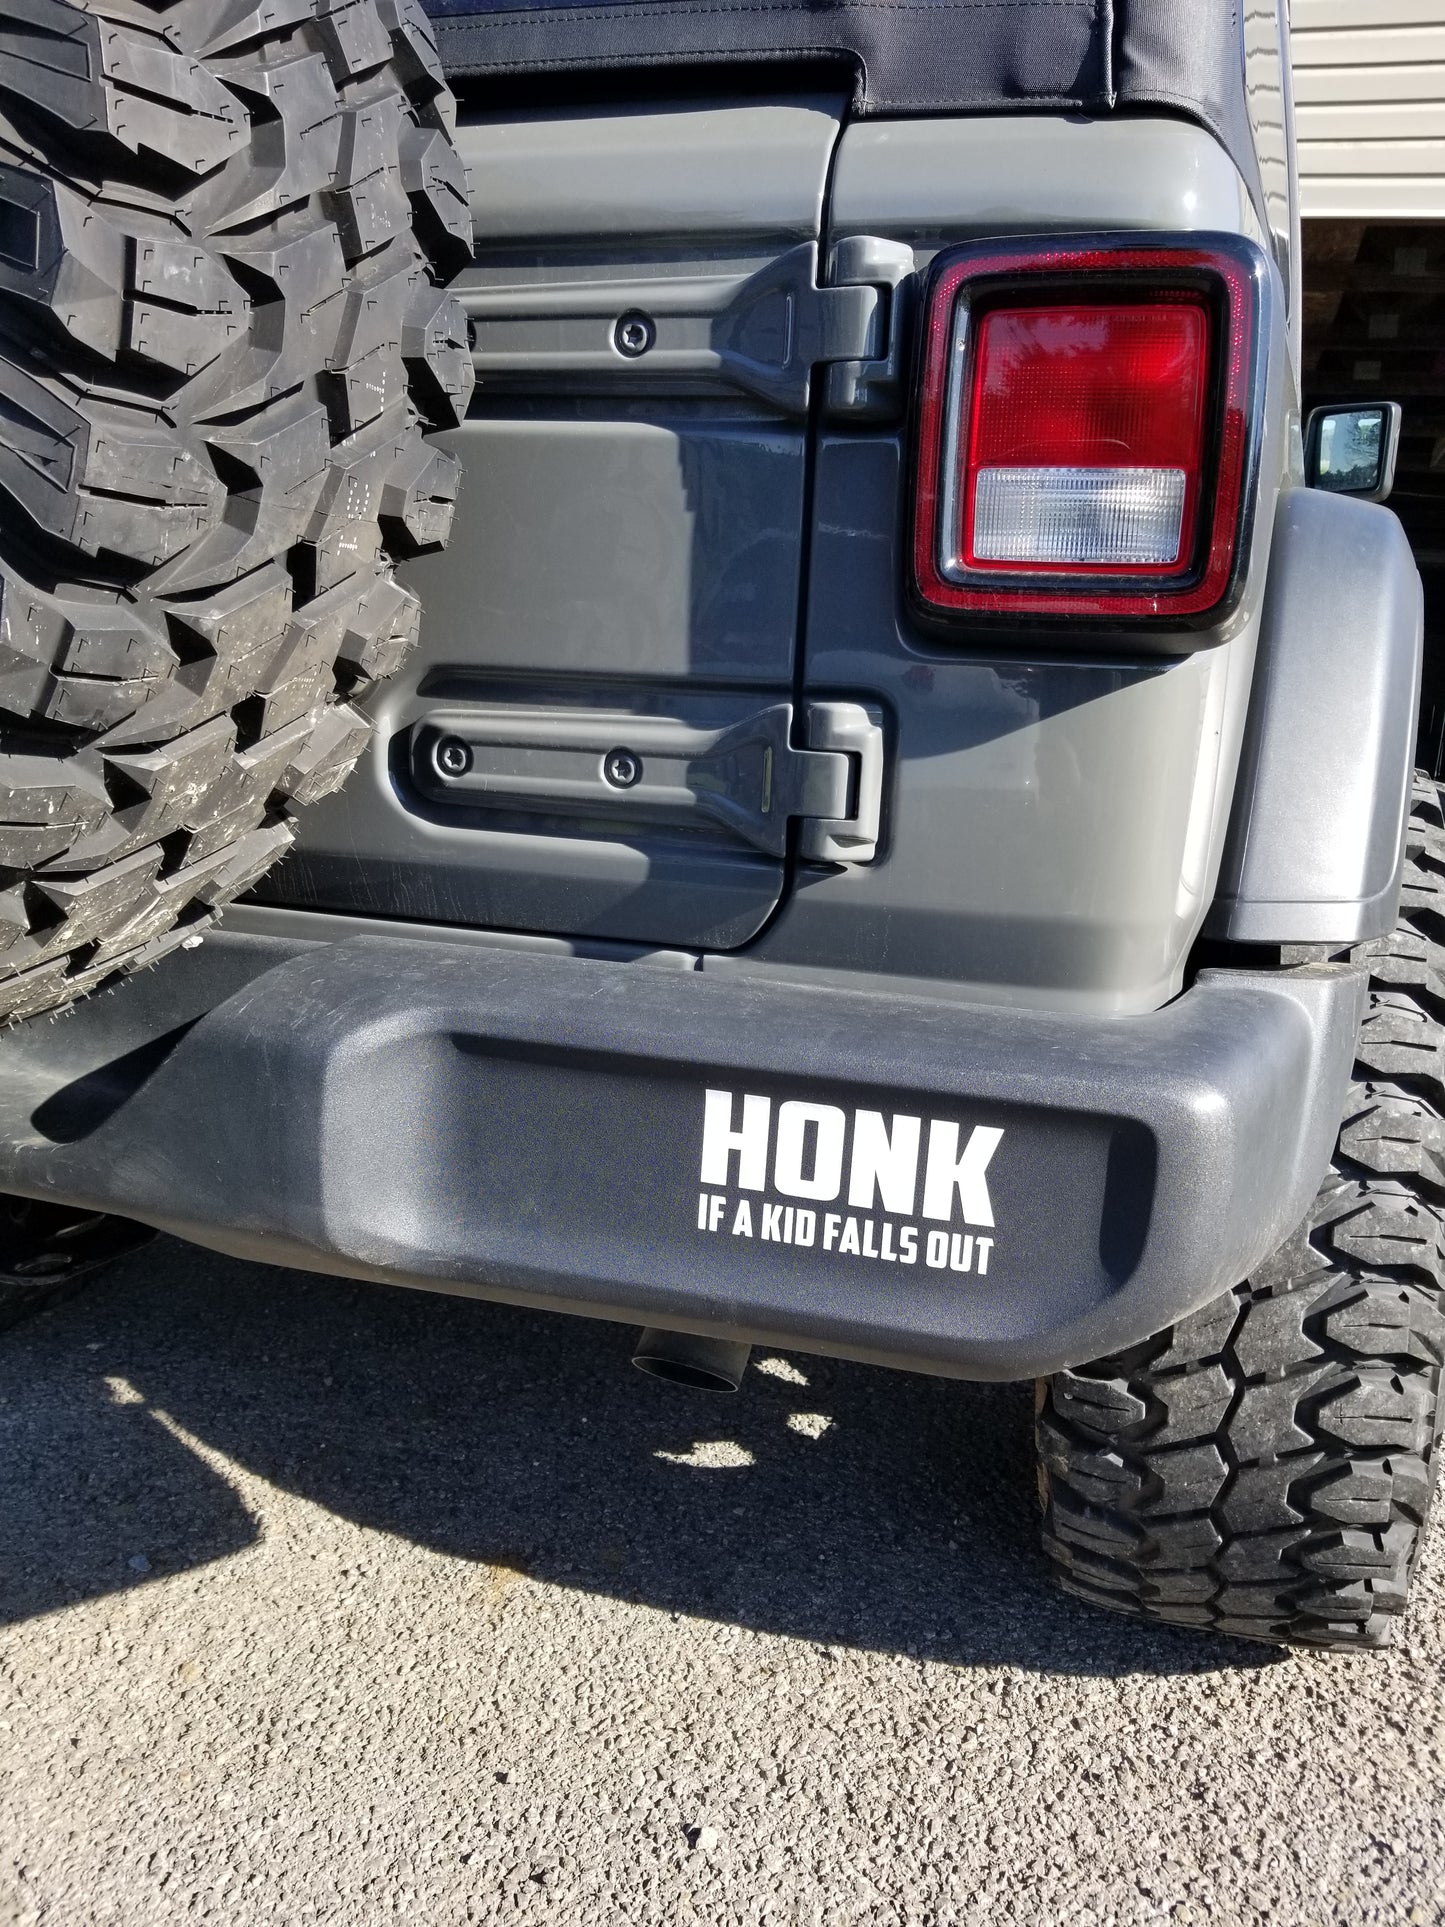 "HONK If A Kid Falls Out" Jeep, SUV, van, bus, or any vehicle